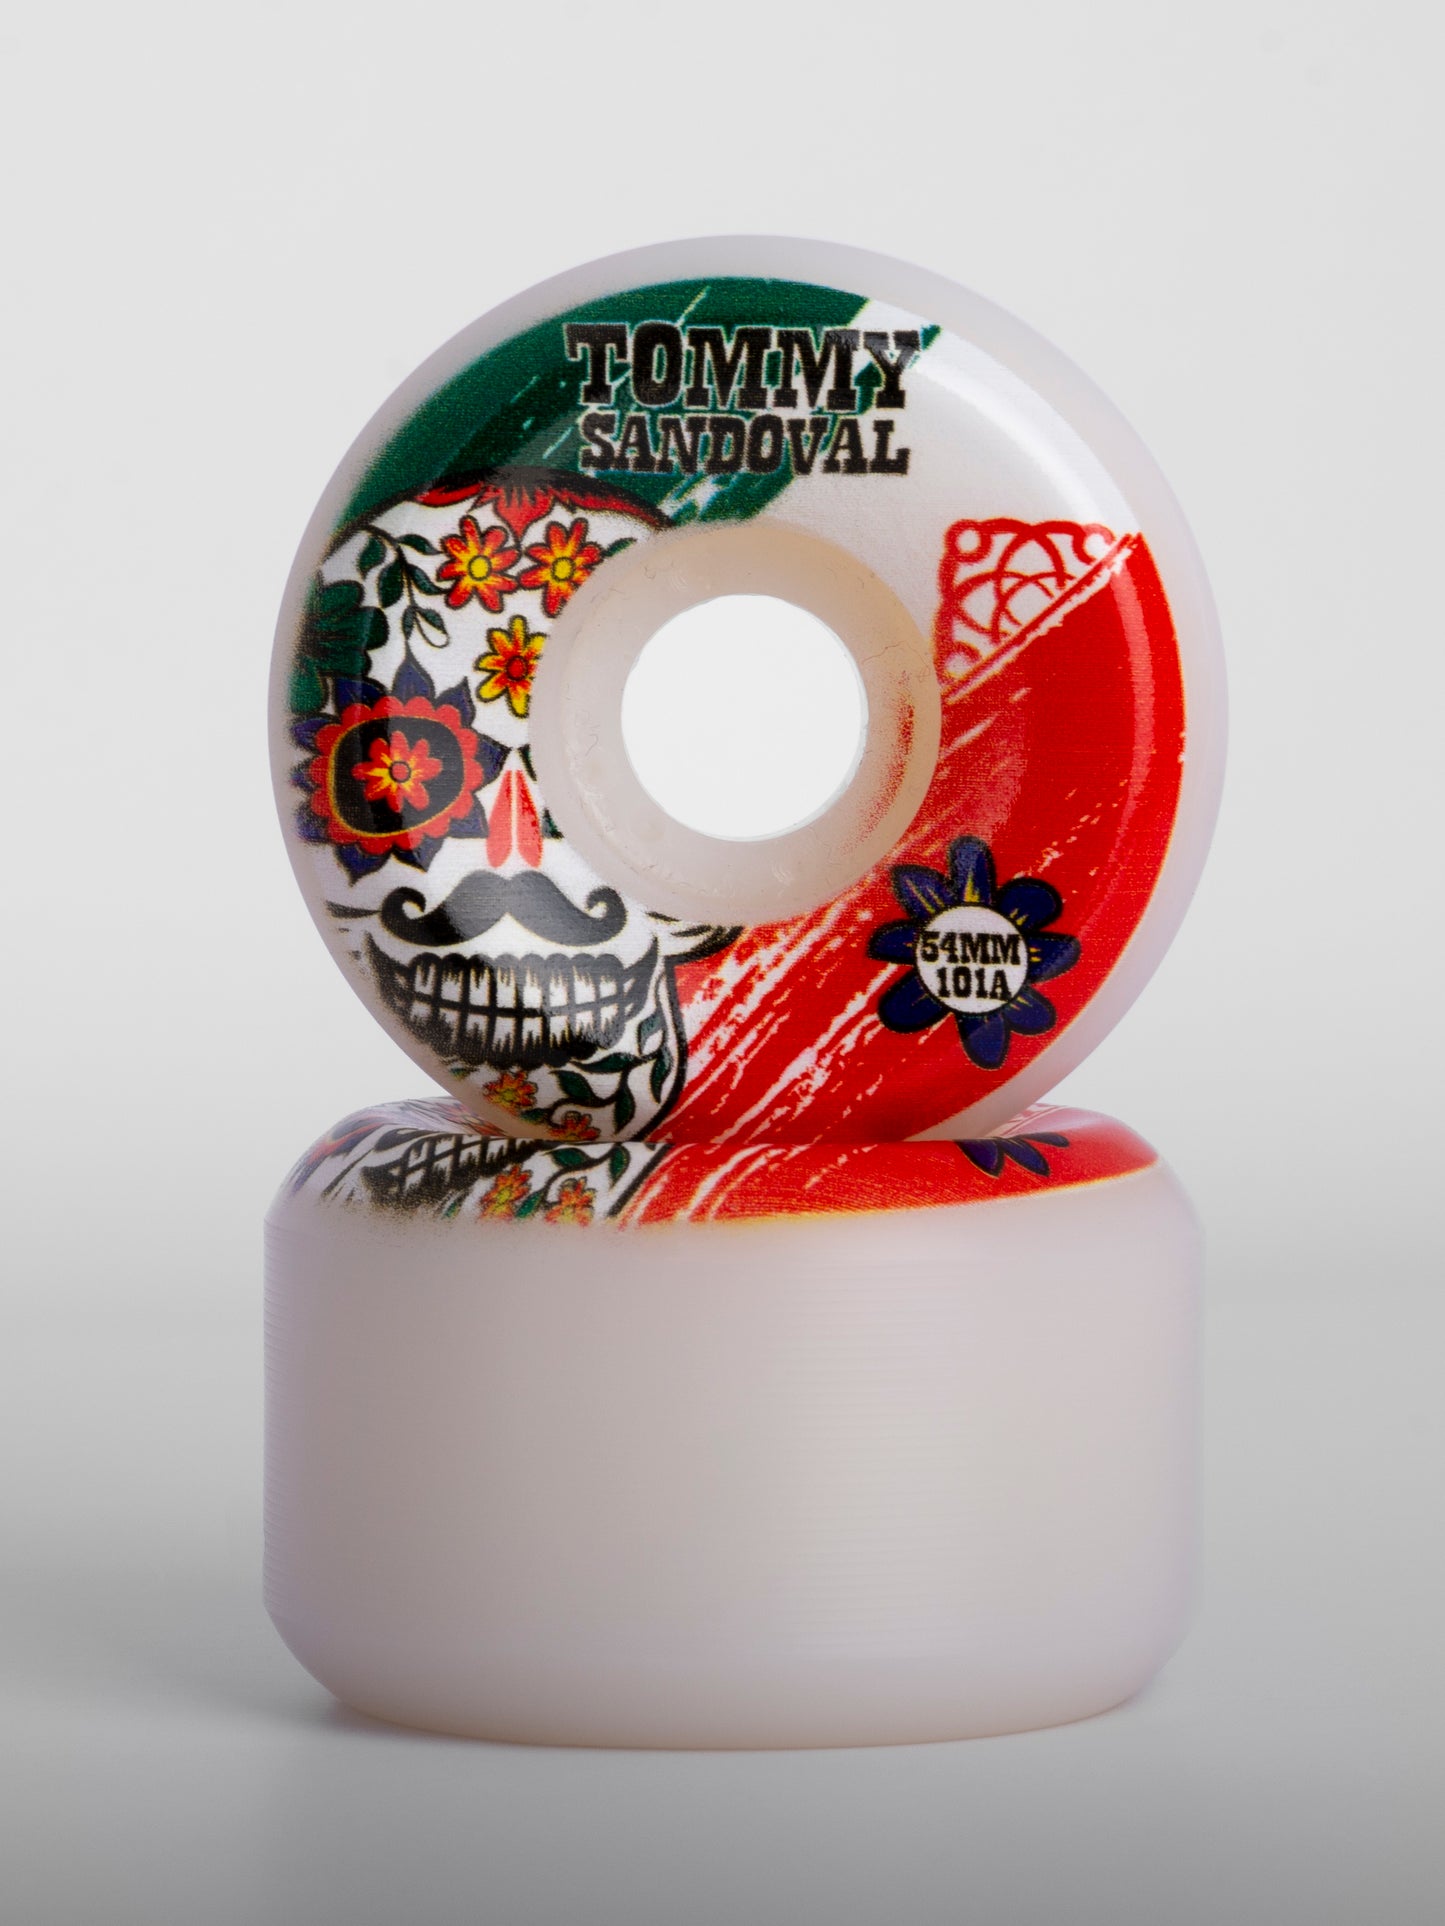 SATORI Tommy Sandoval Day of the Dead ล้อ 54mm/101a